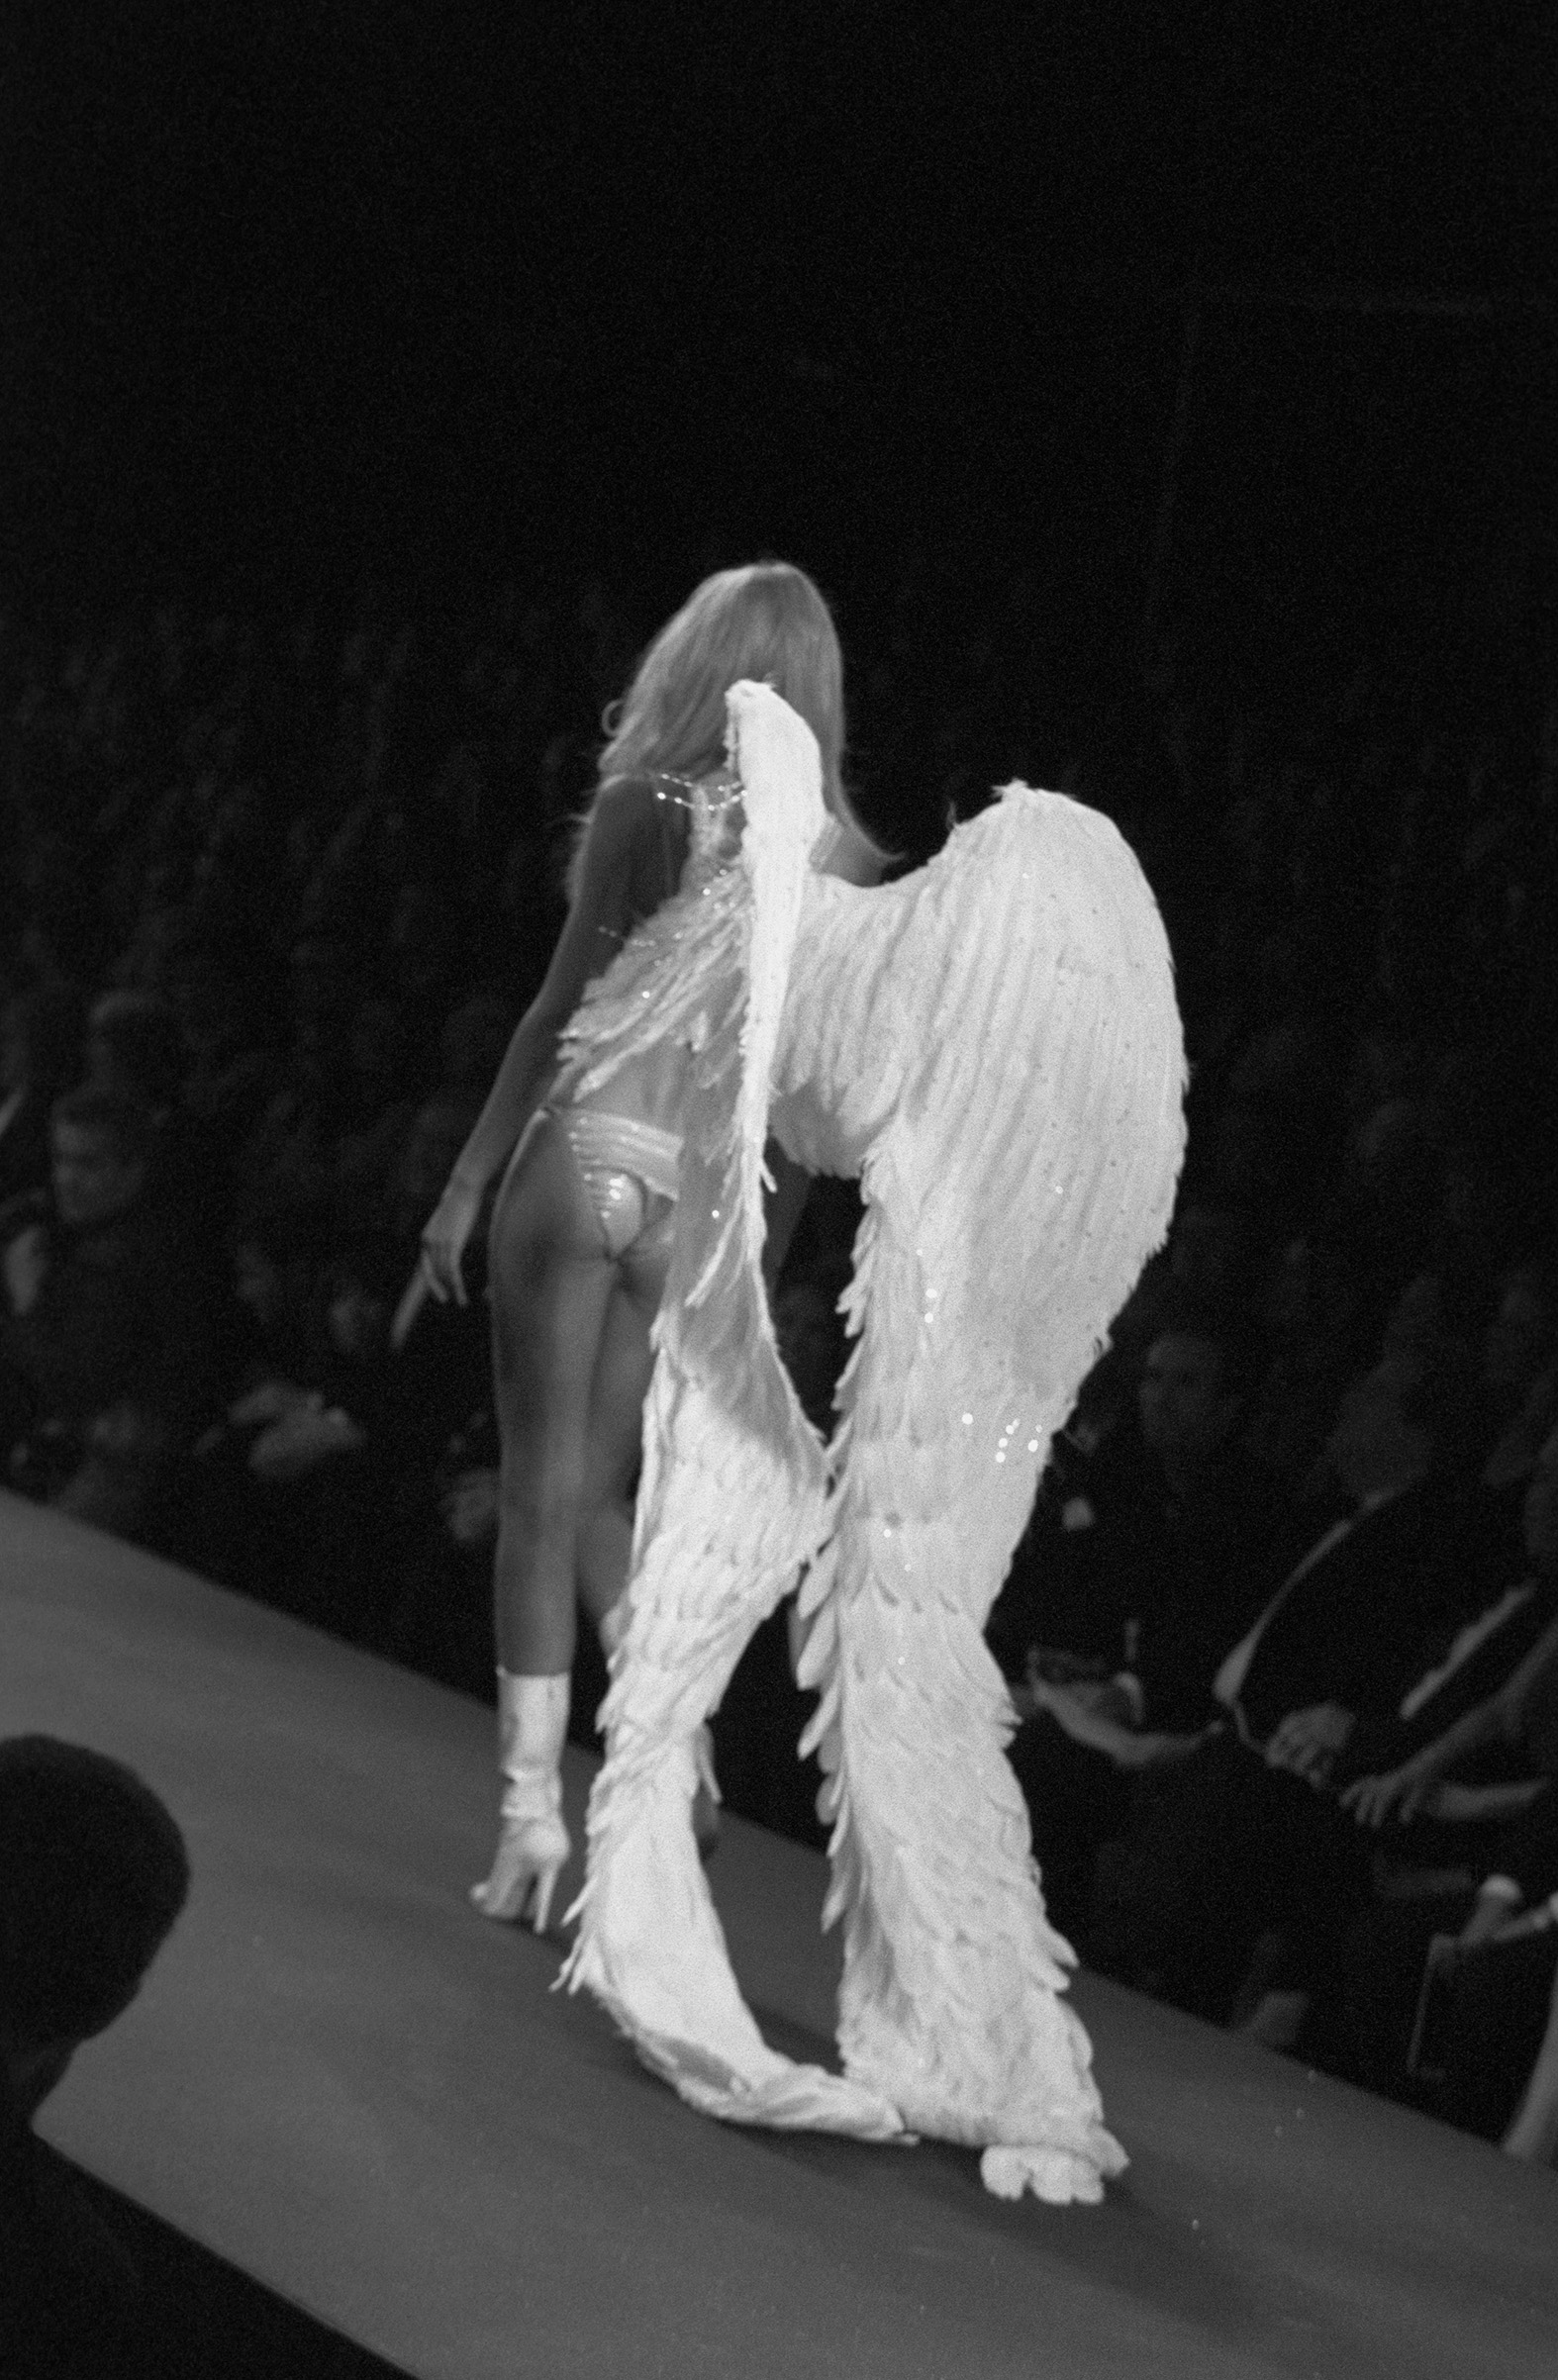 Supermodel and Victoria’s Secret Angel Heidi Klum walks the brand’s renowned fashion show in Cannes, France, in 2000 (Edgar Herbst—13 Photo/Redux)